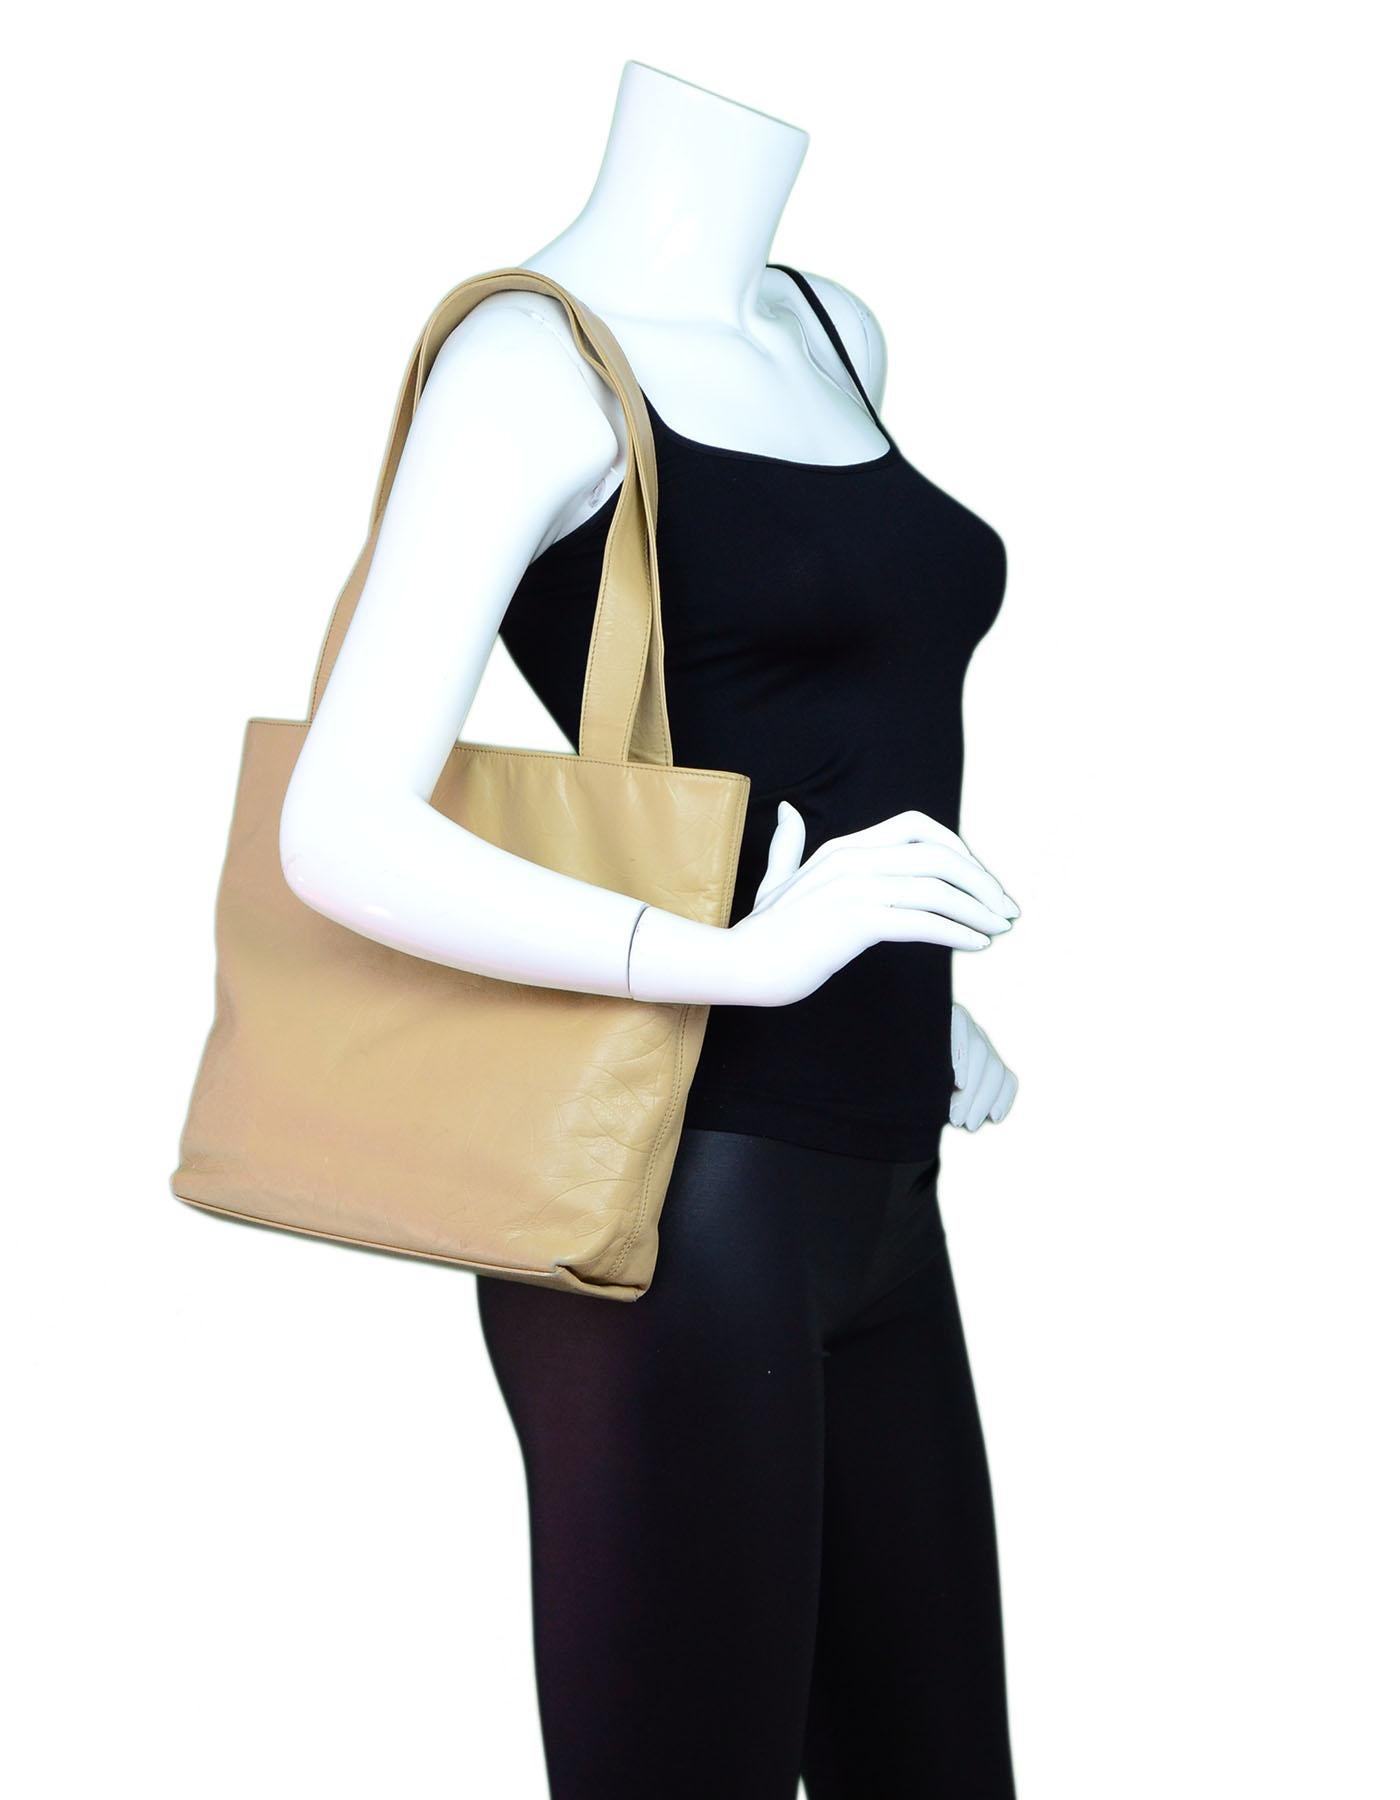 Chanel Beige Leather CC Embossed Tote

Made In: Italy
Year of Production: 2000-2002
Color: Beige
Hardware: Goldtone
Materials: Leathr
Lining: Beige grossgrain
Closure/Opening: Open top with center magneitc snap
Exterior Pockets: None
Interior